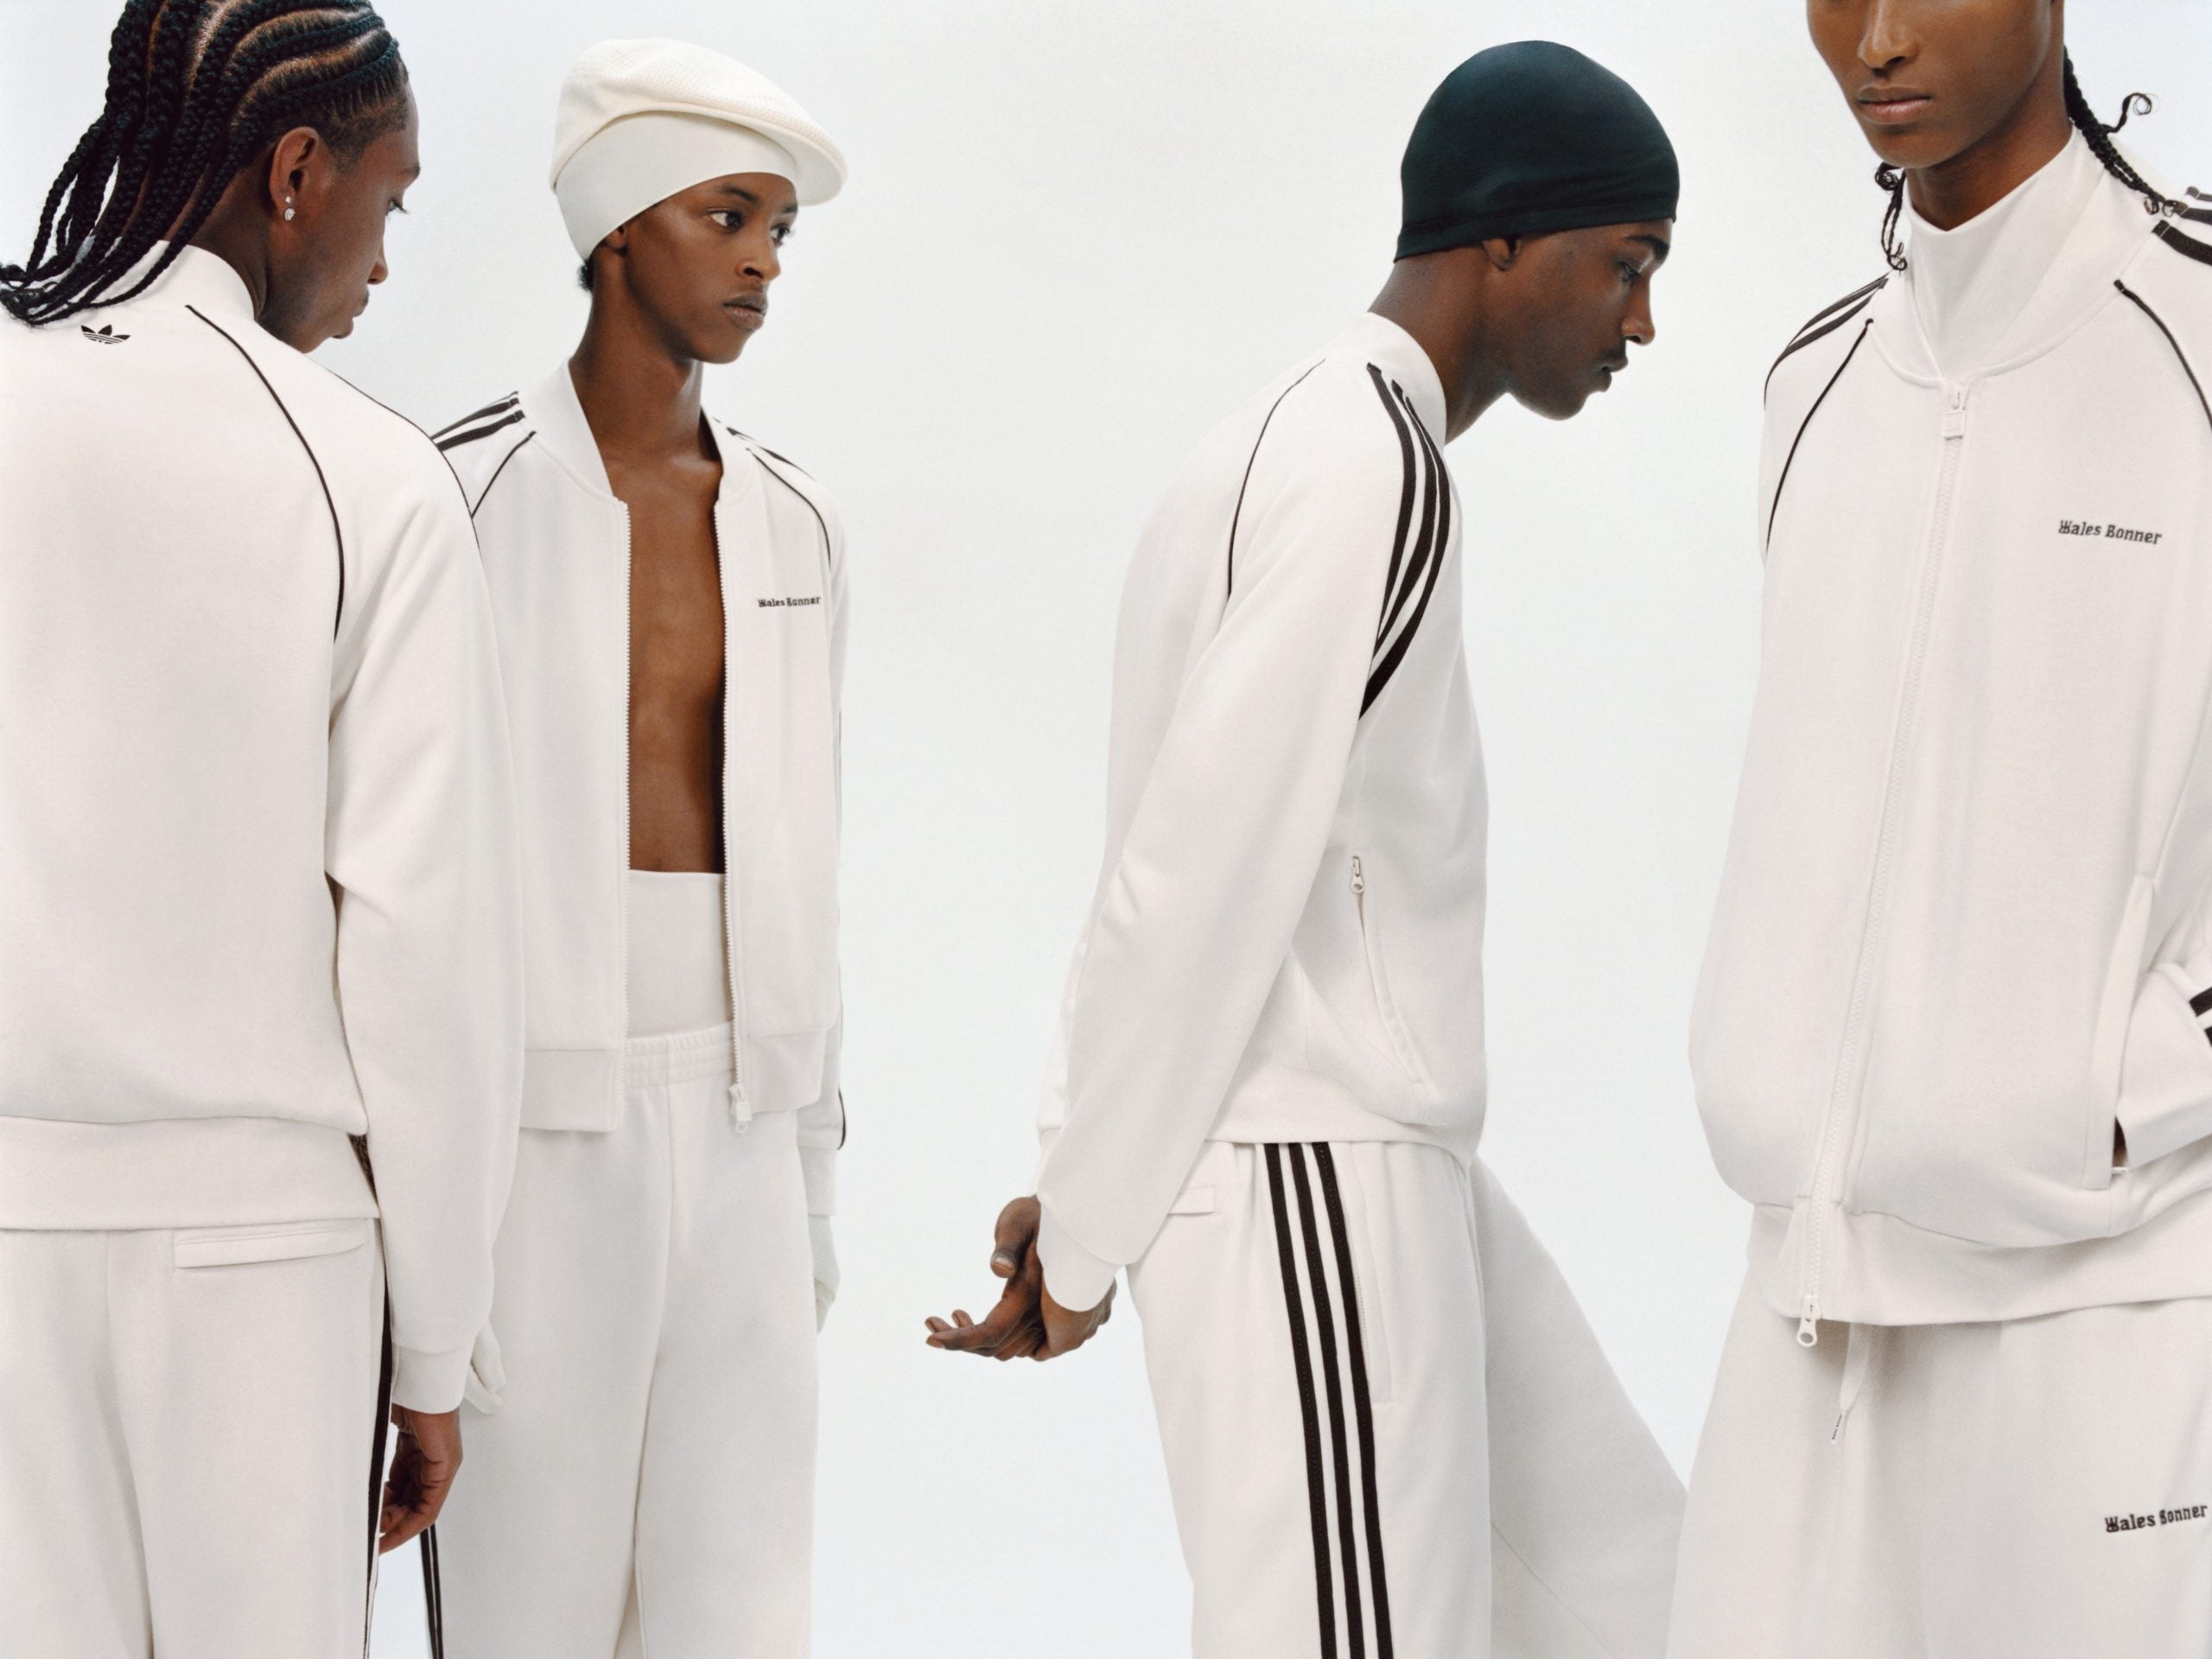 Wales Bonner And Adidas Originals Have Announced Their Fall/Winter 2023 Collection